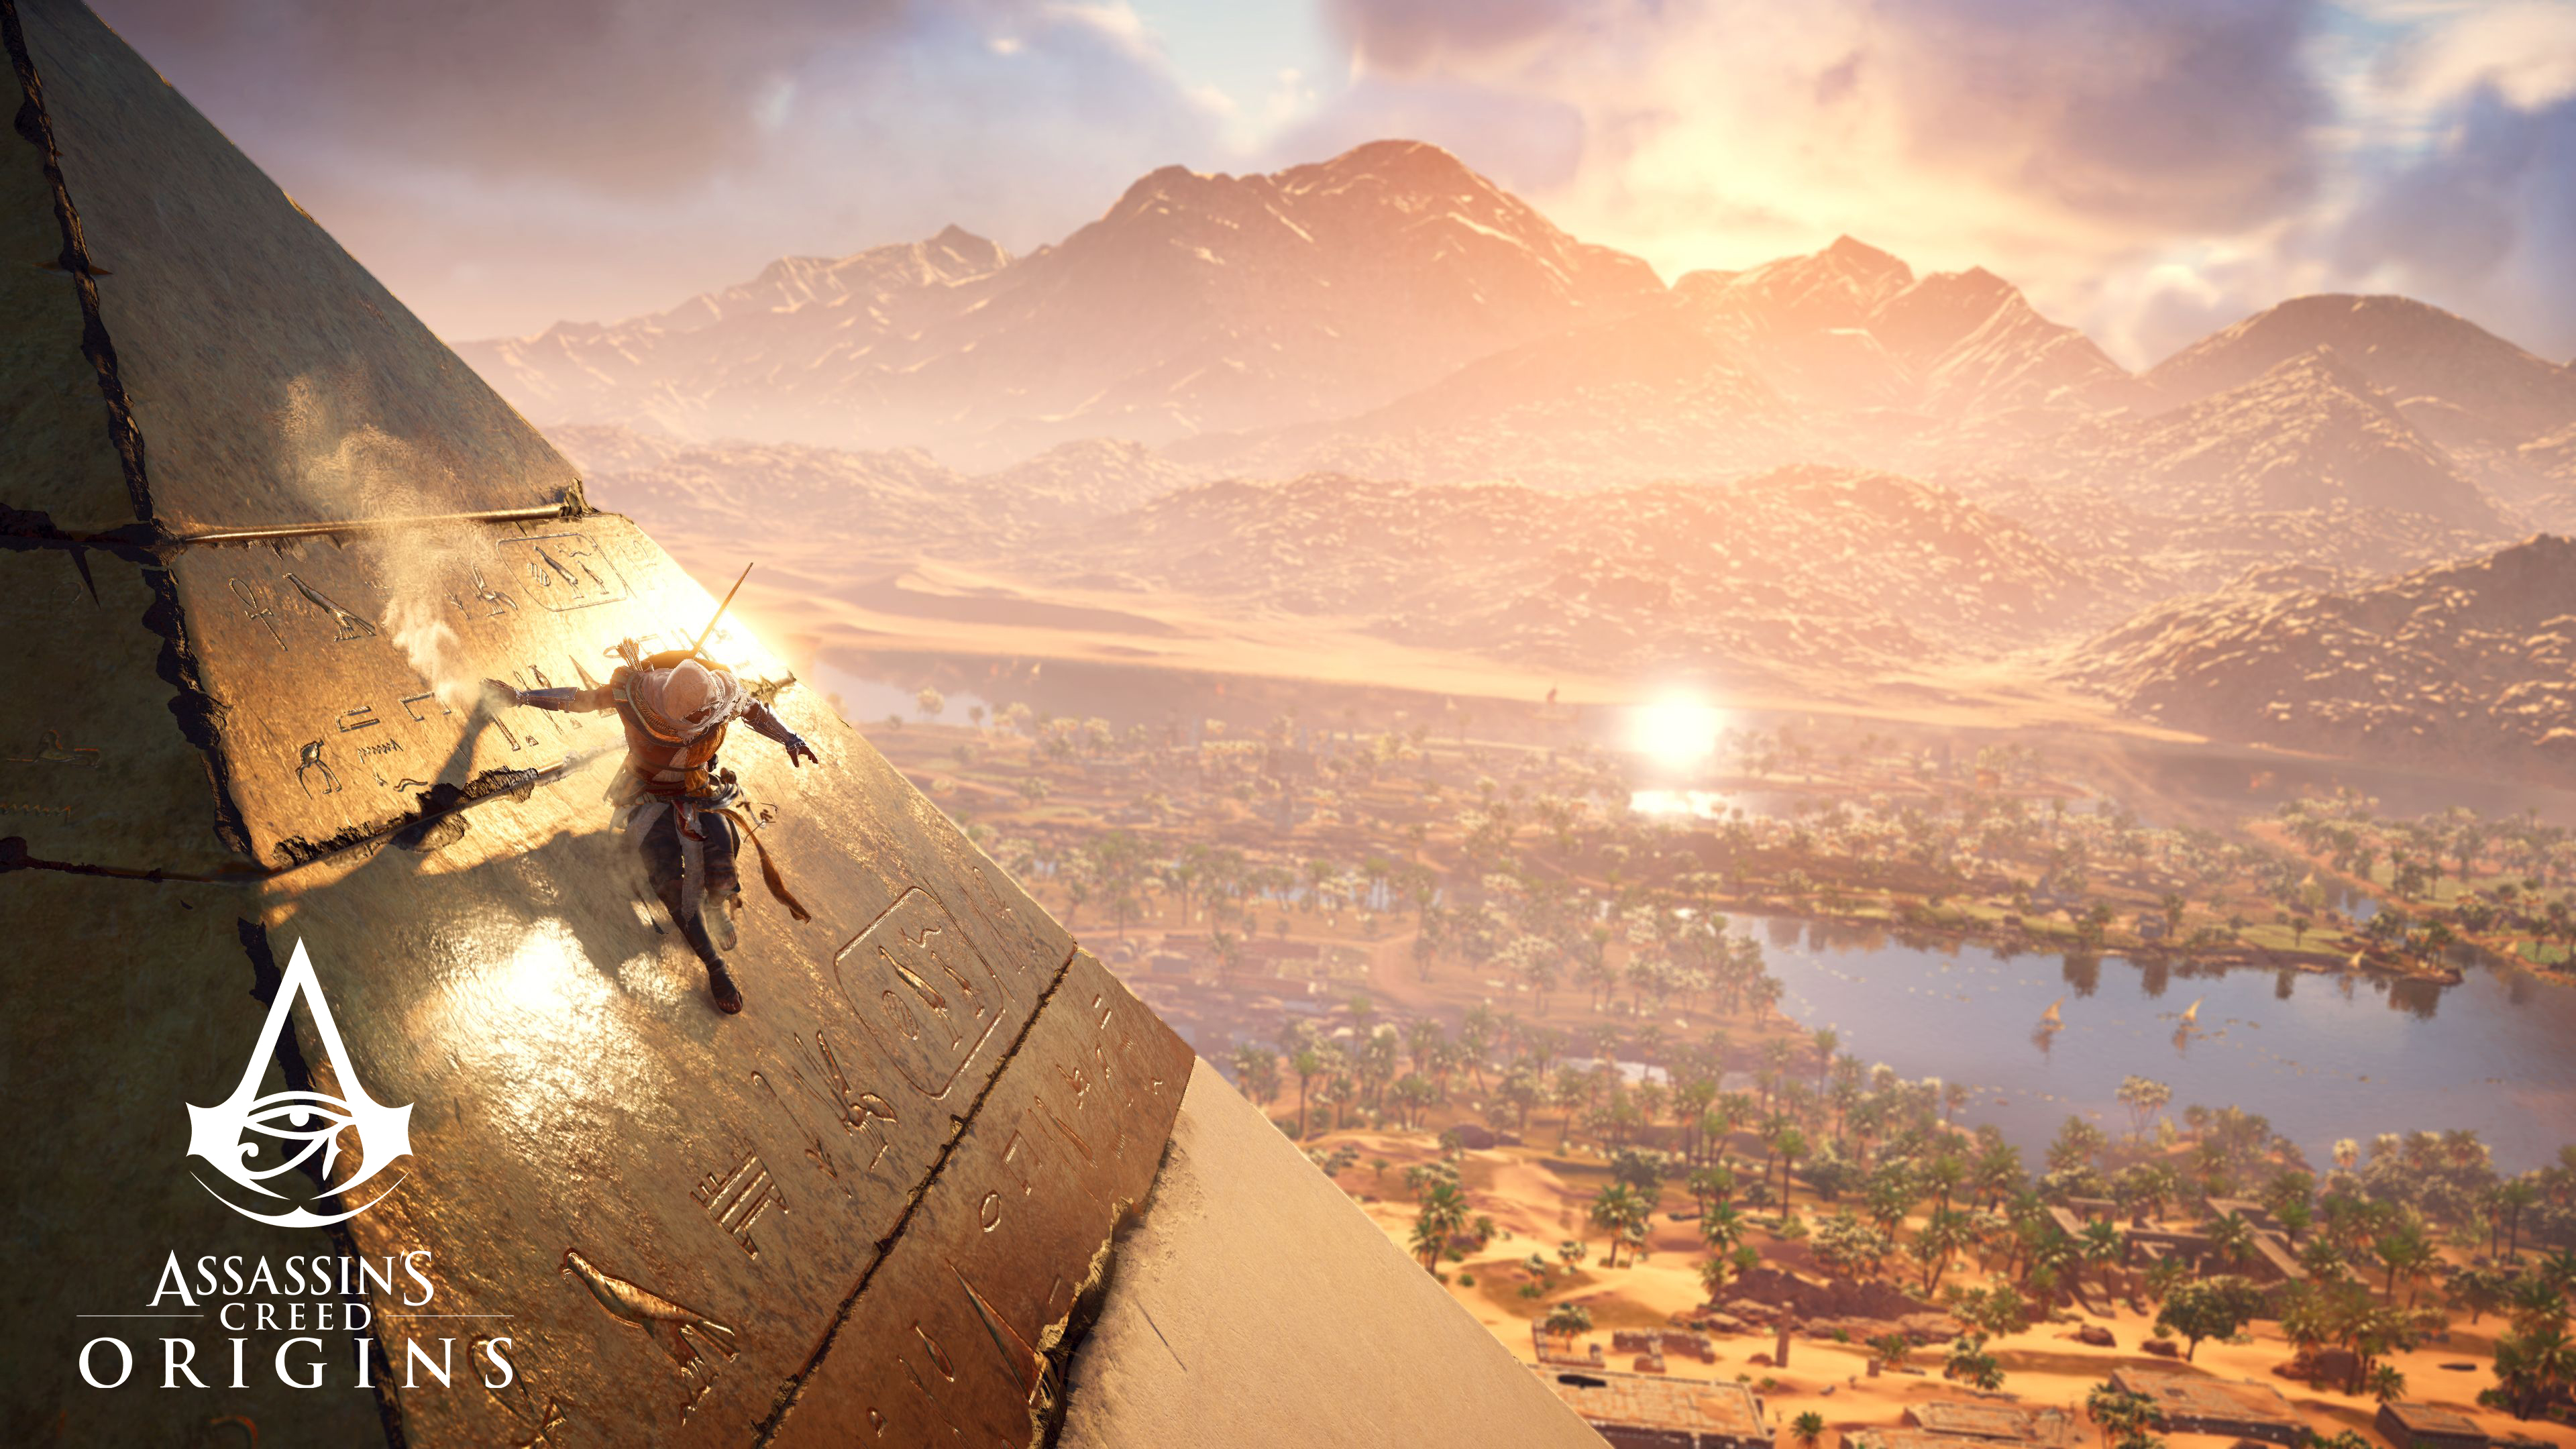 HD for desktop 1080p Assassin's Creed 